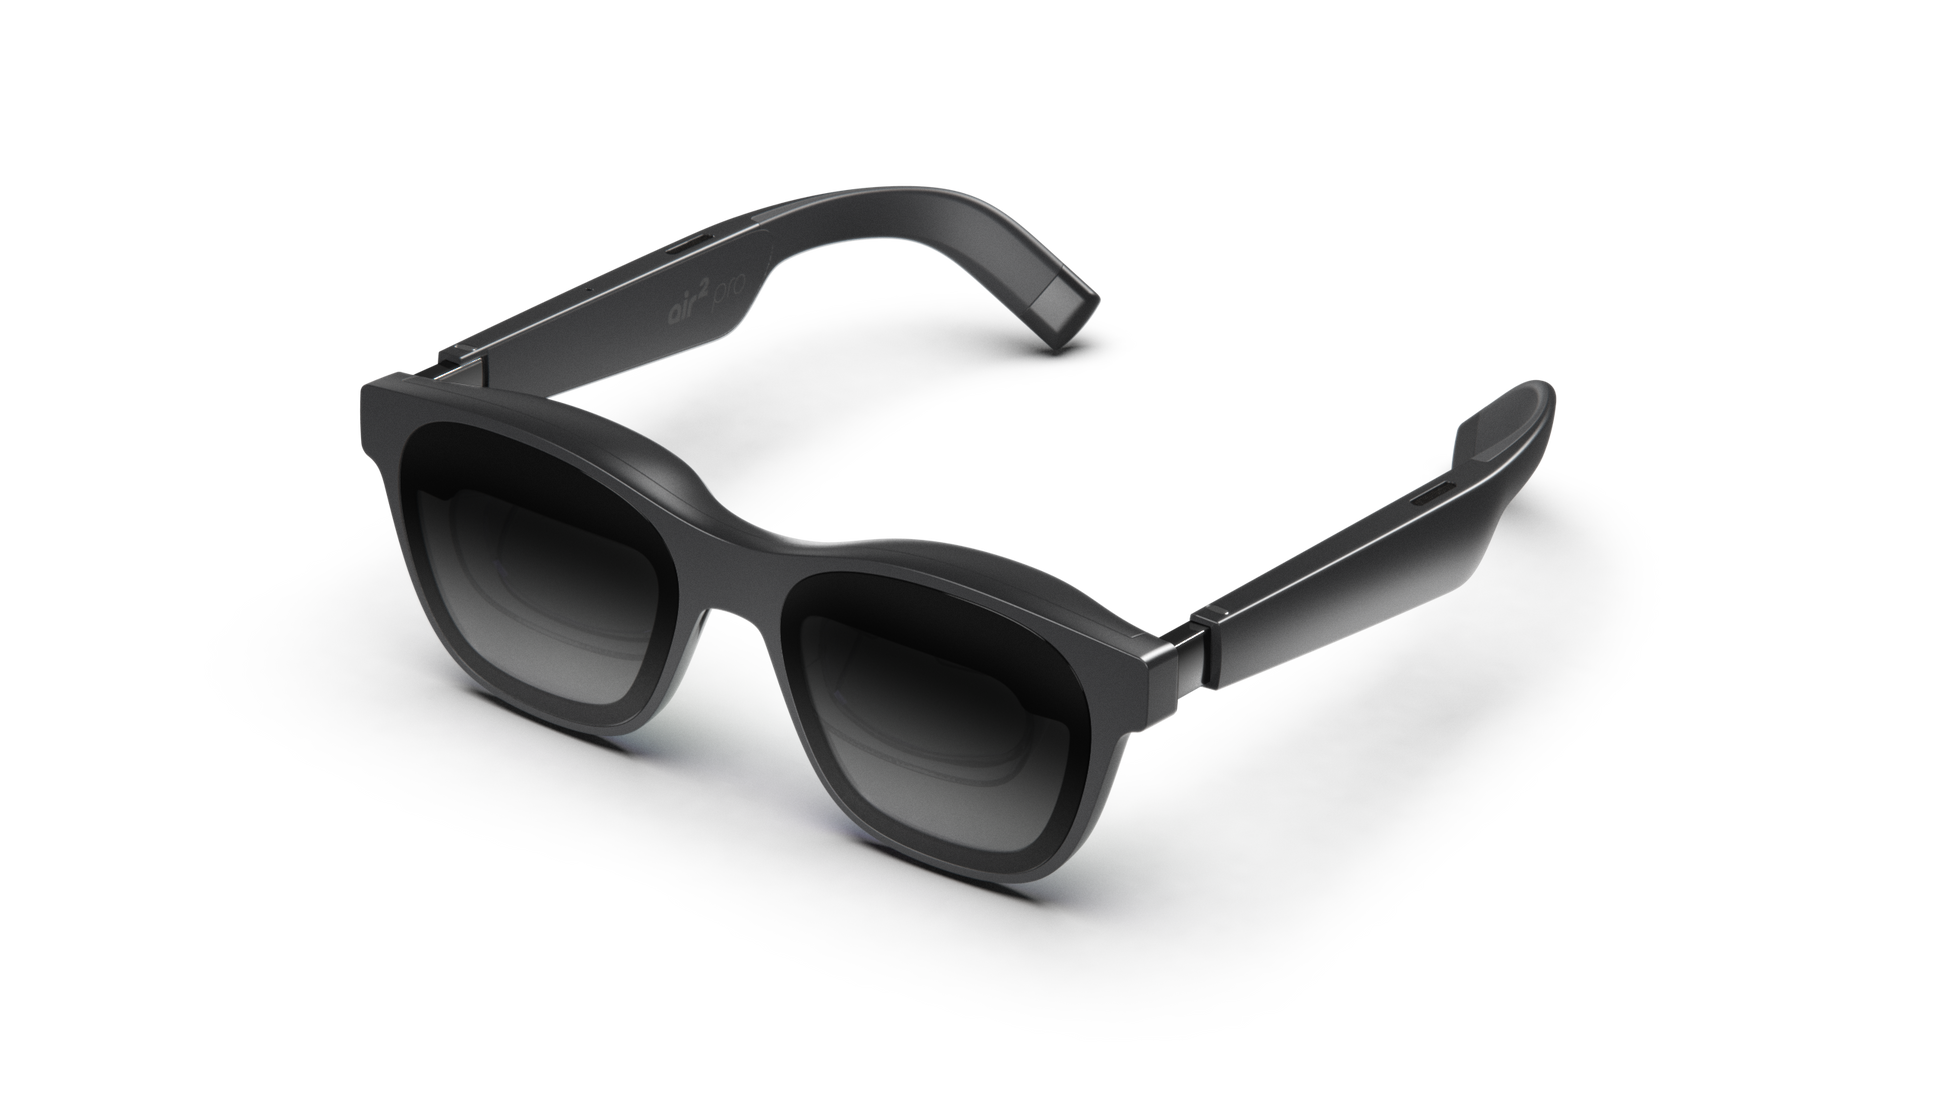 You can preorder Xreal's Air 2 augmented reality glasses now